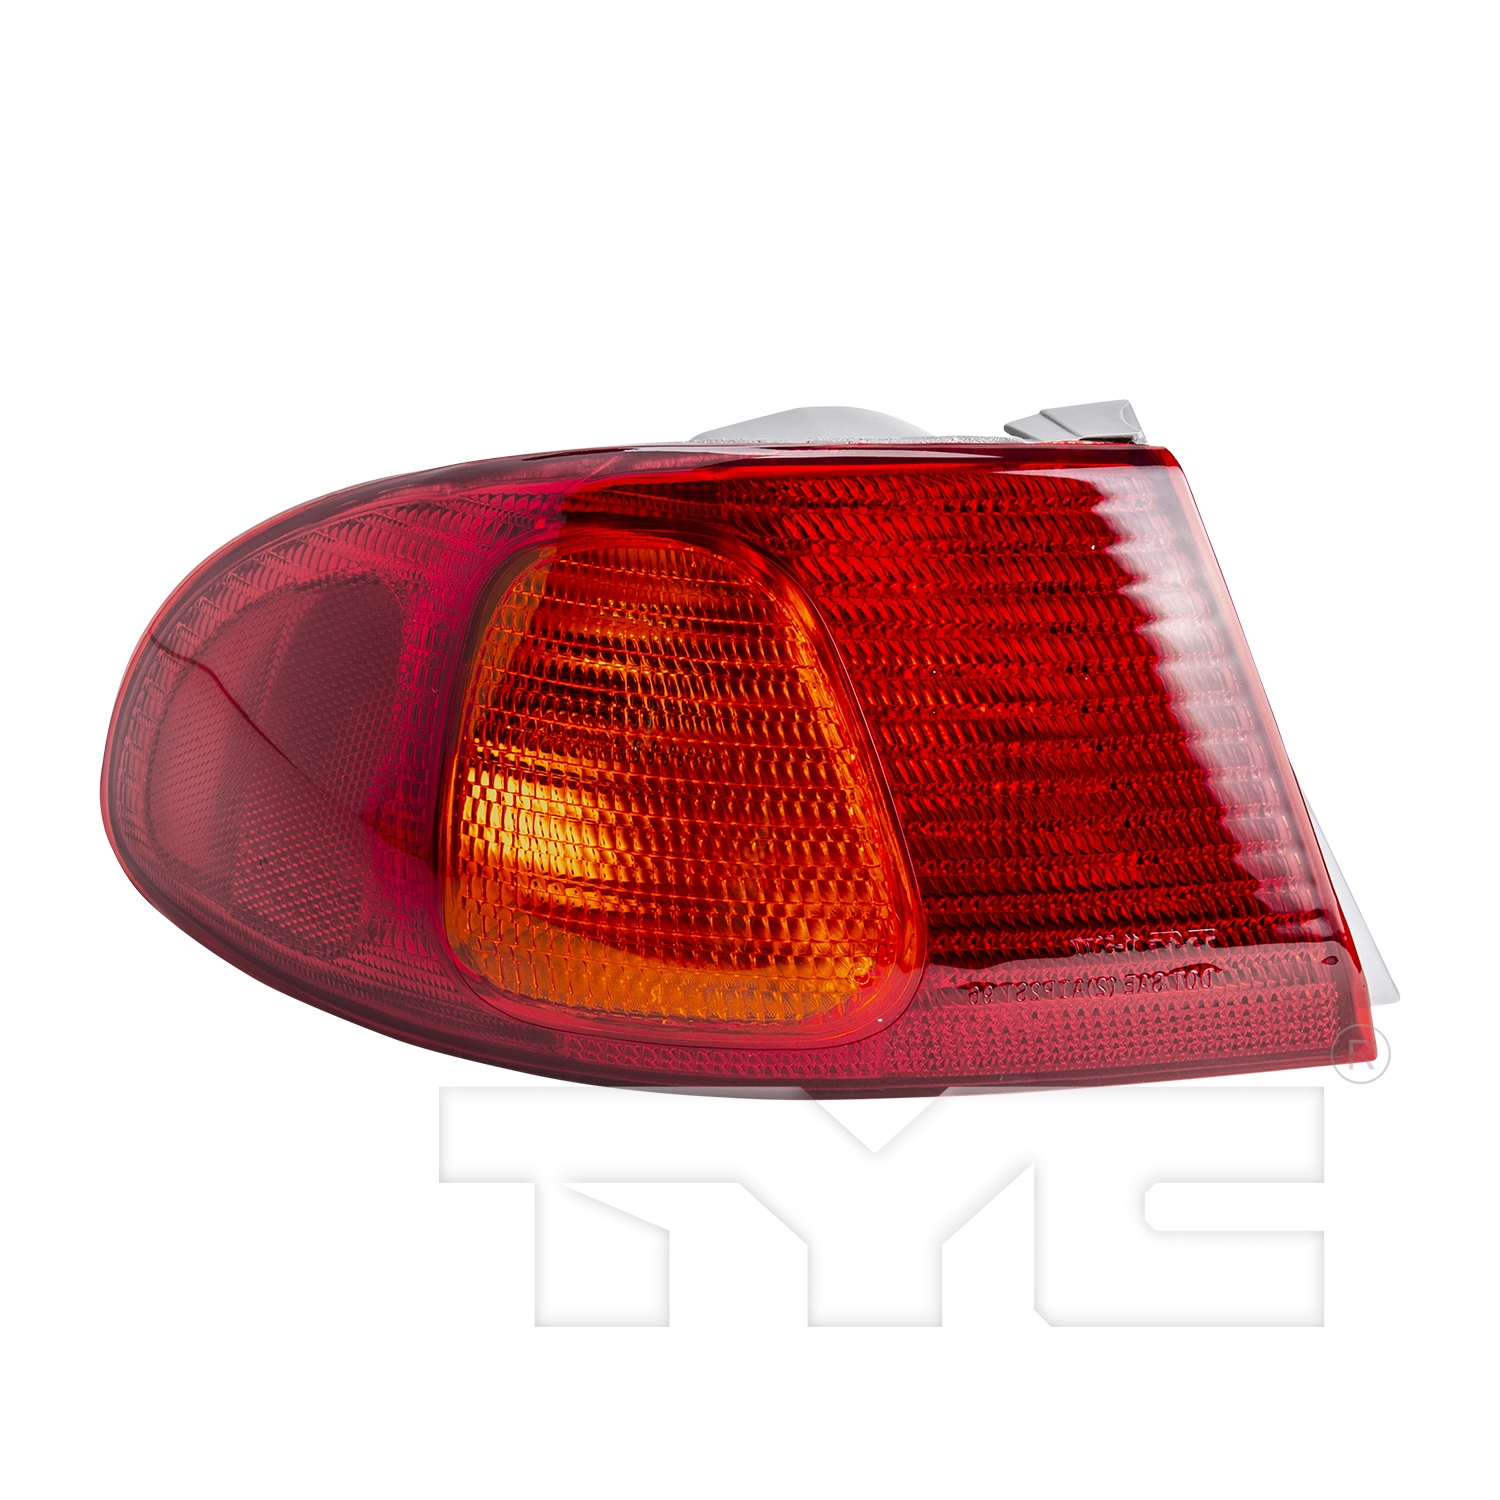 Aftermarket TAILLIGHTS for TOYOTA - COROLLA, COROLLA,98-02,LT Taillamp assy